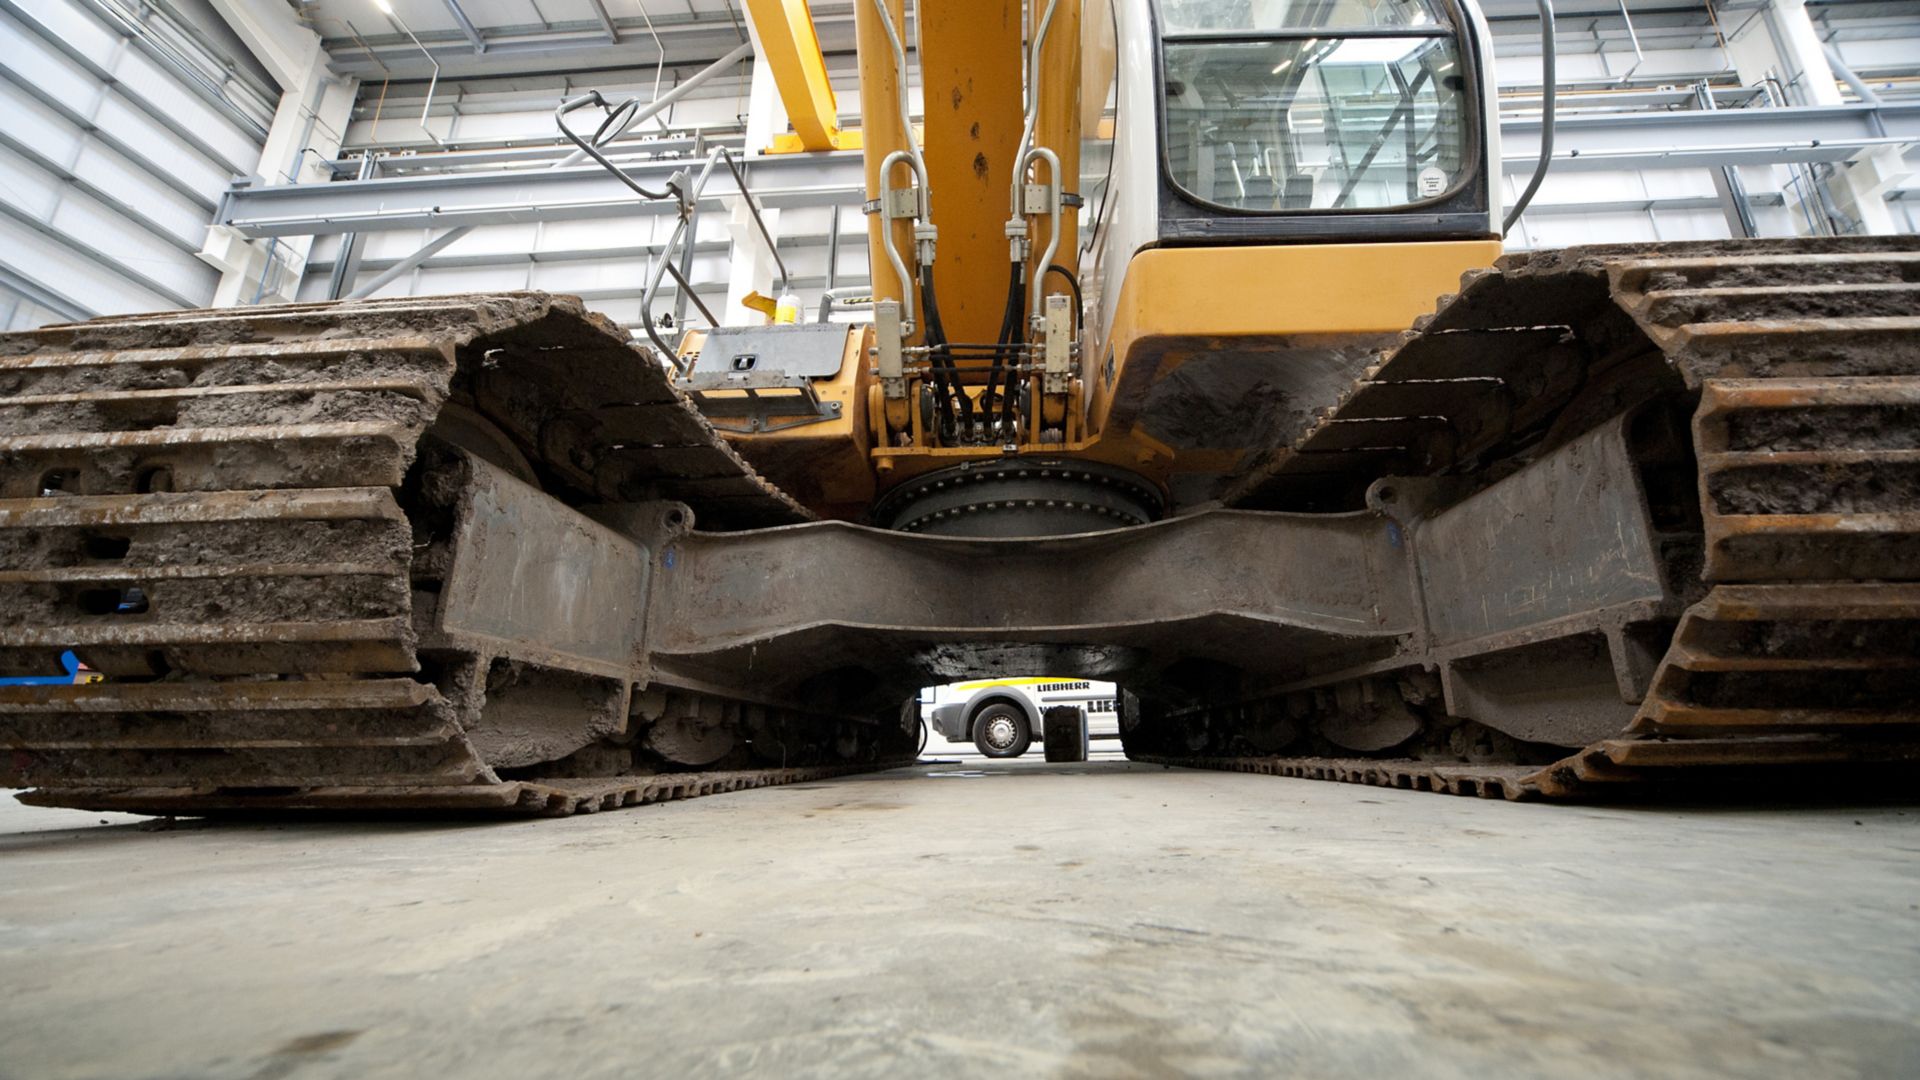 Excavator standing on heavy duty cementitious floor in warehouse